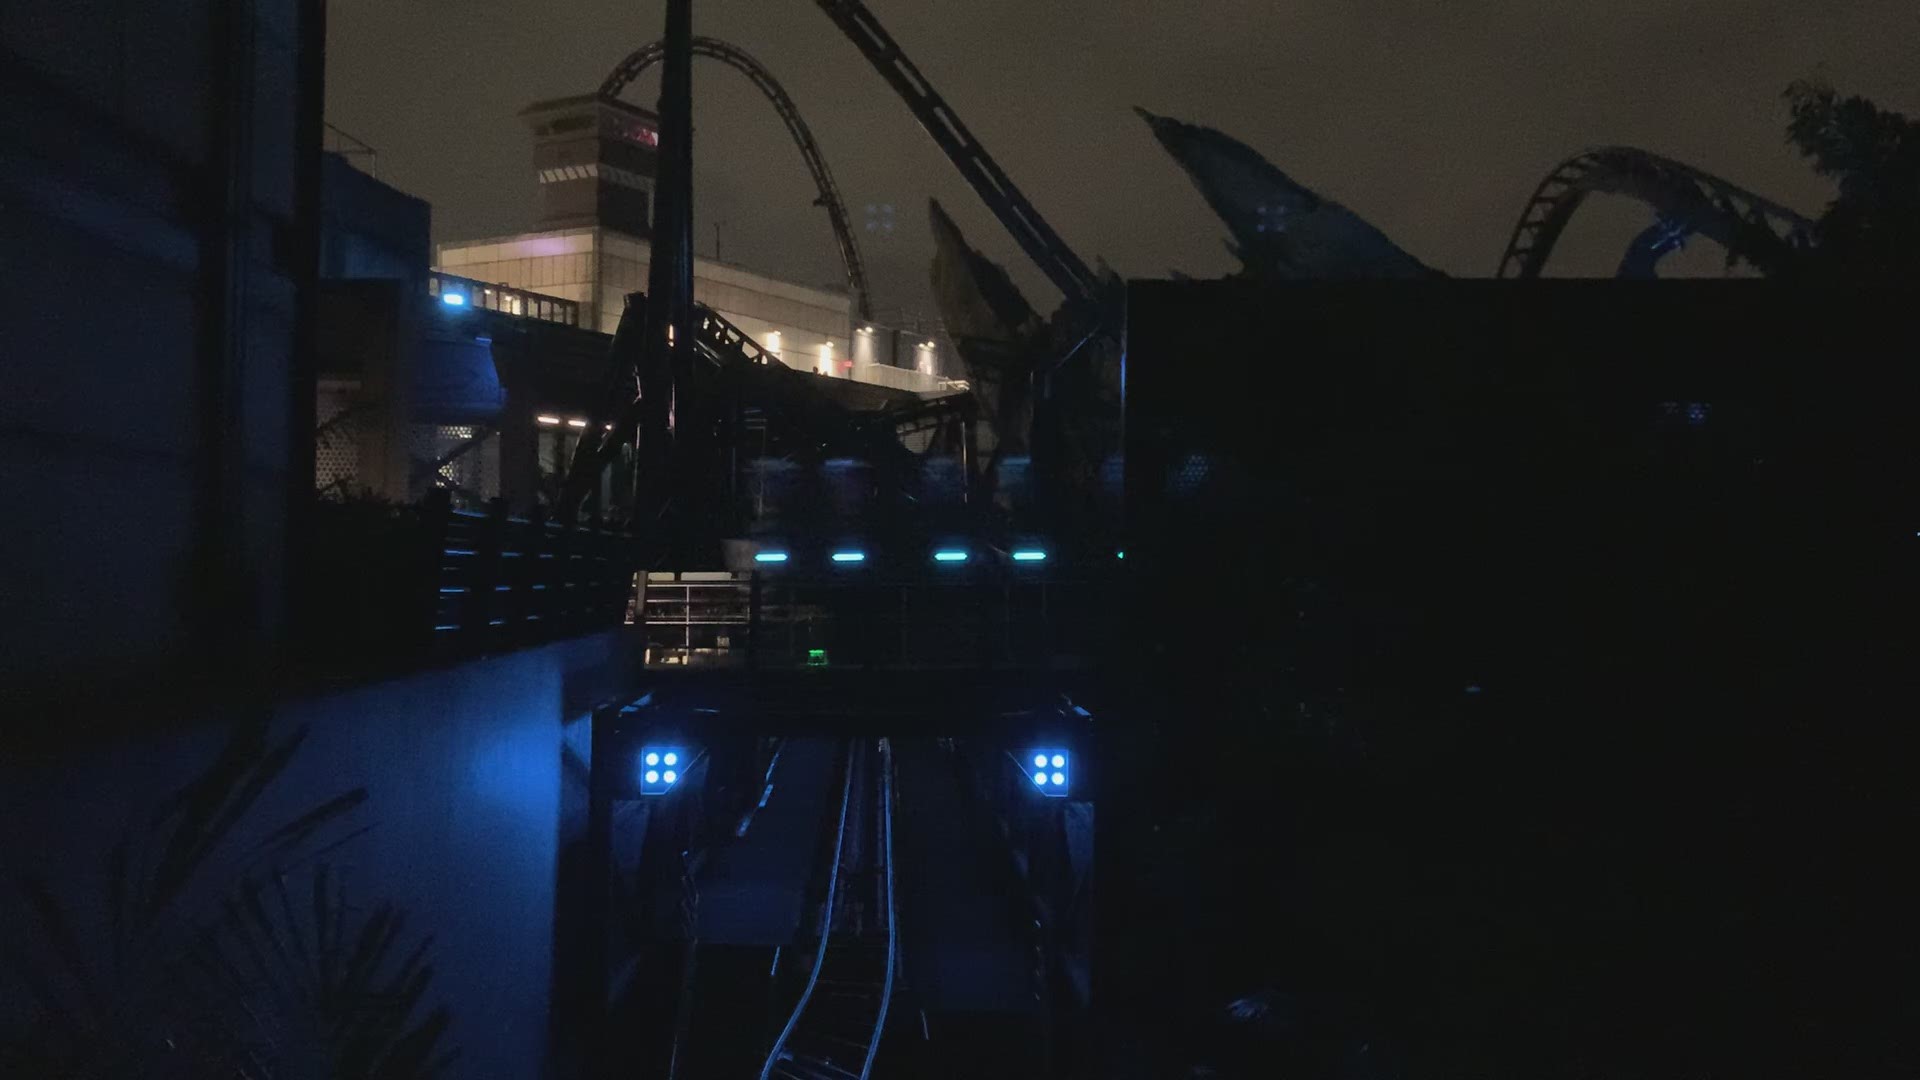 Check out Jurassic World: Velocicoaster get tested at night.